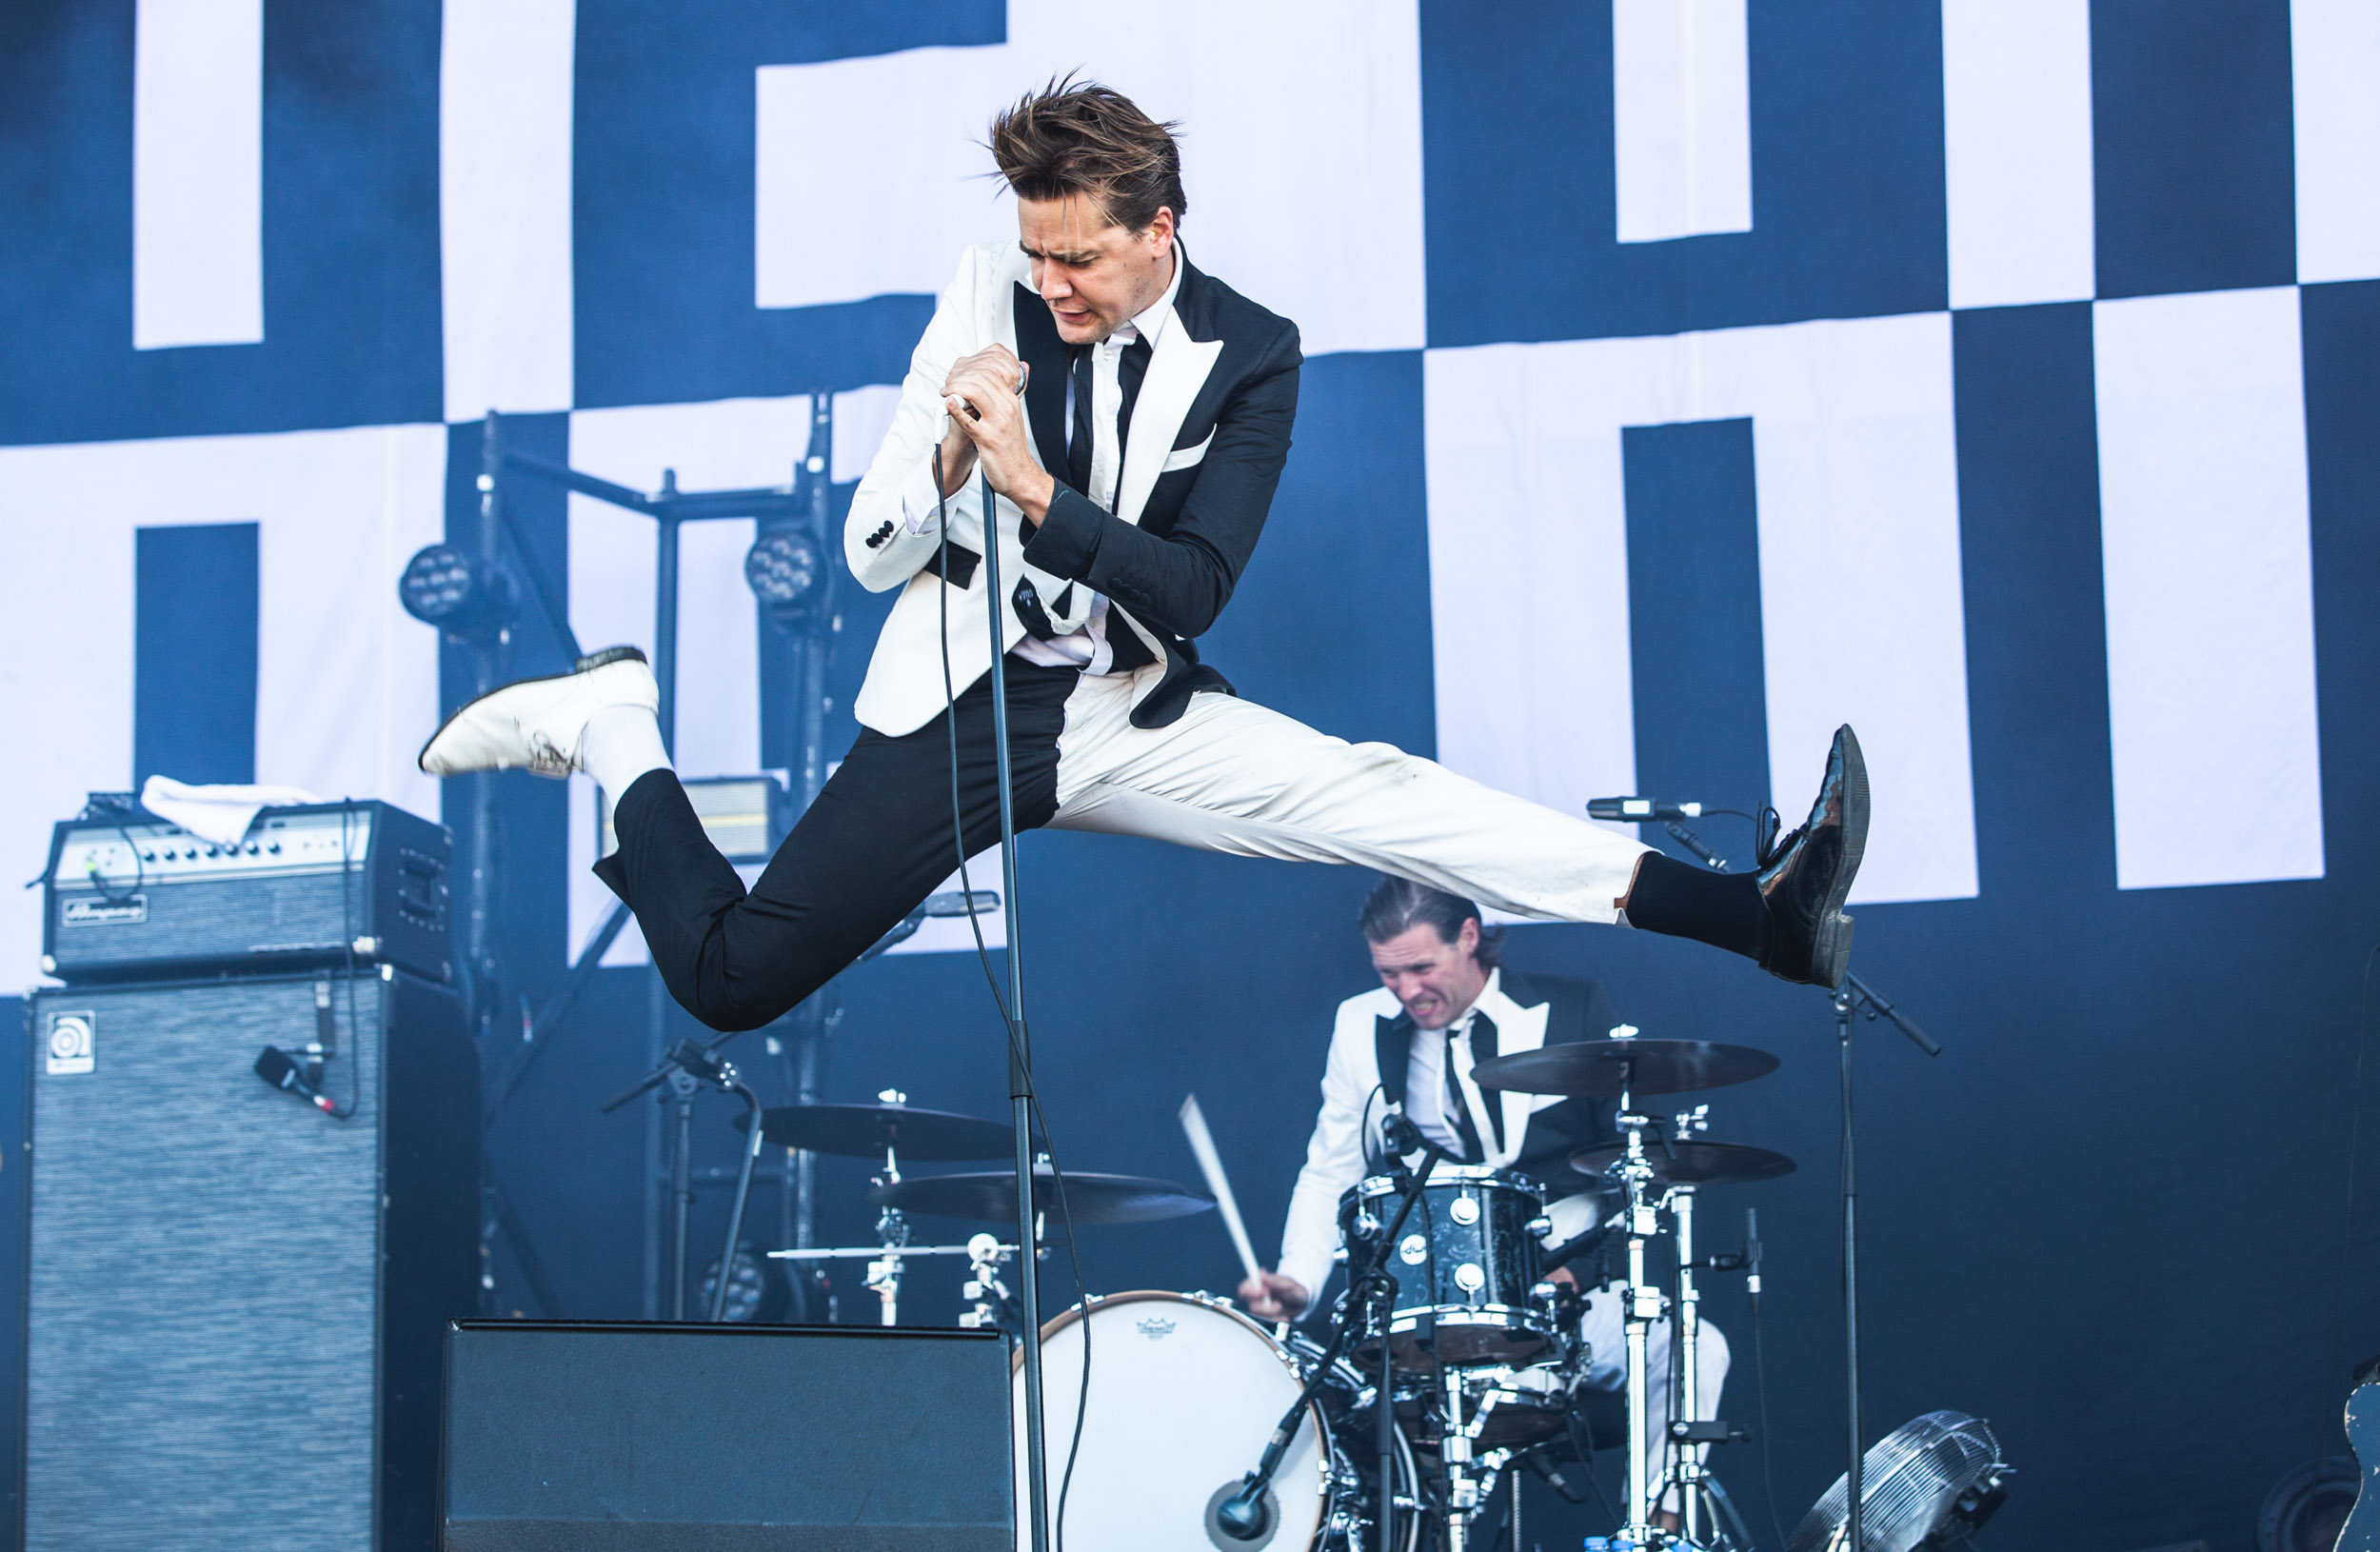 THEHIVES_JF_4180